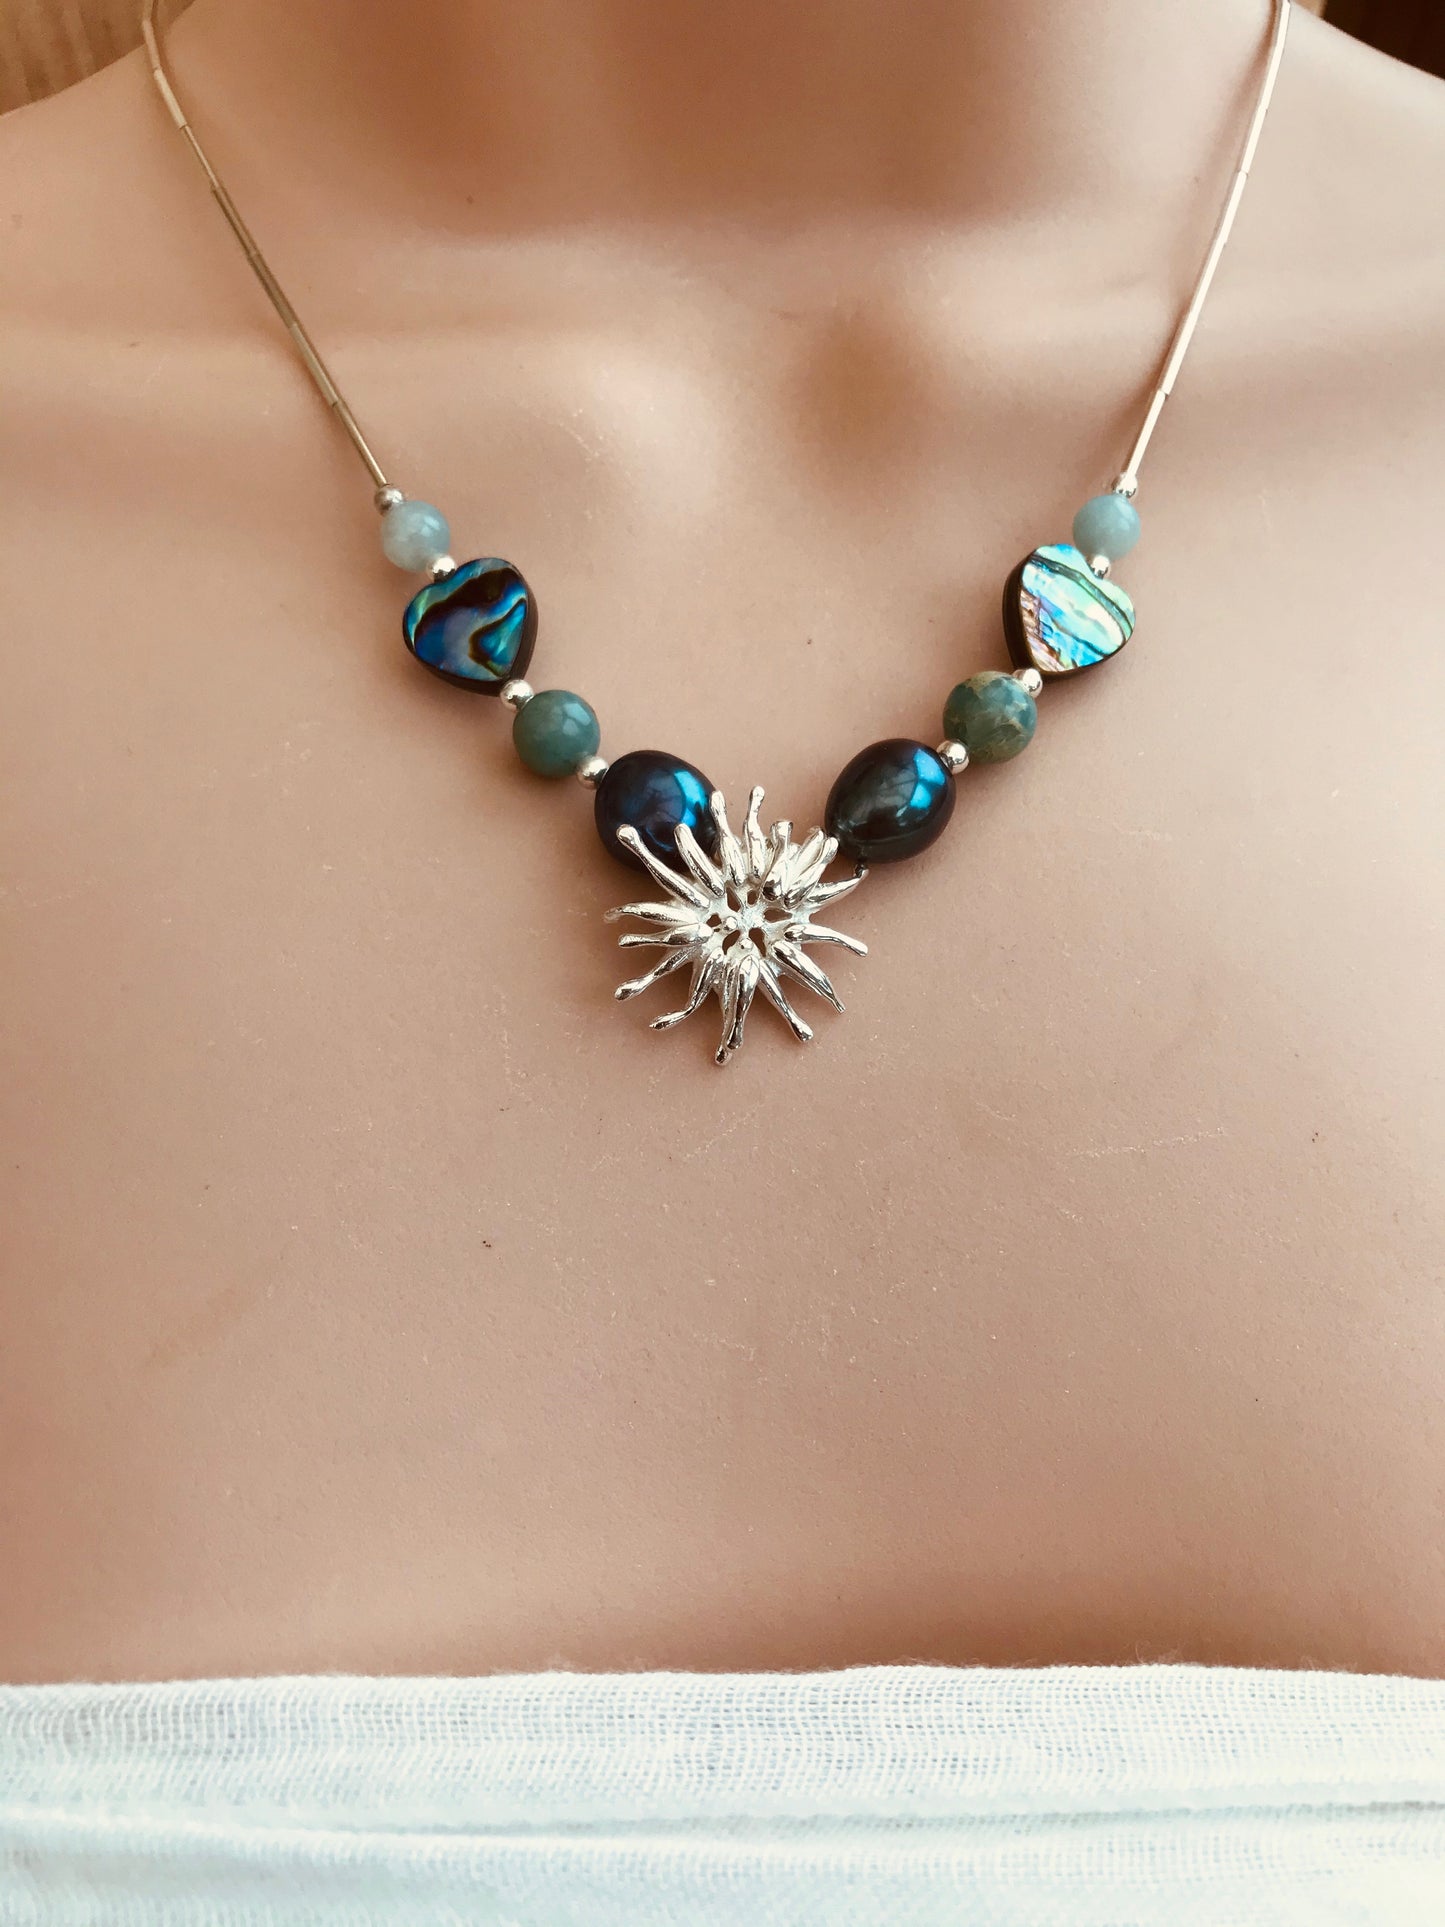 Sea anemone necklace with pearls